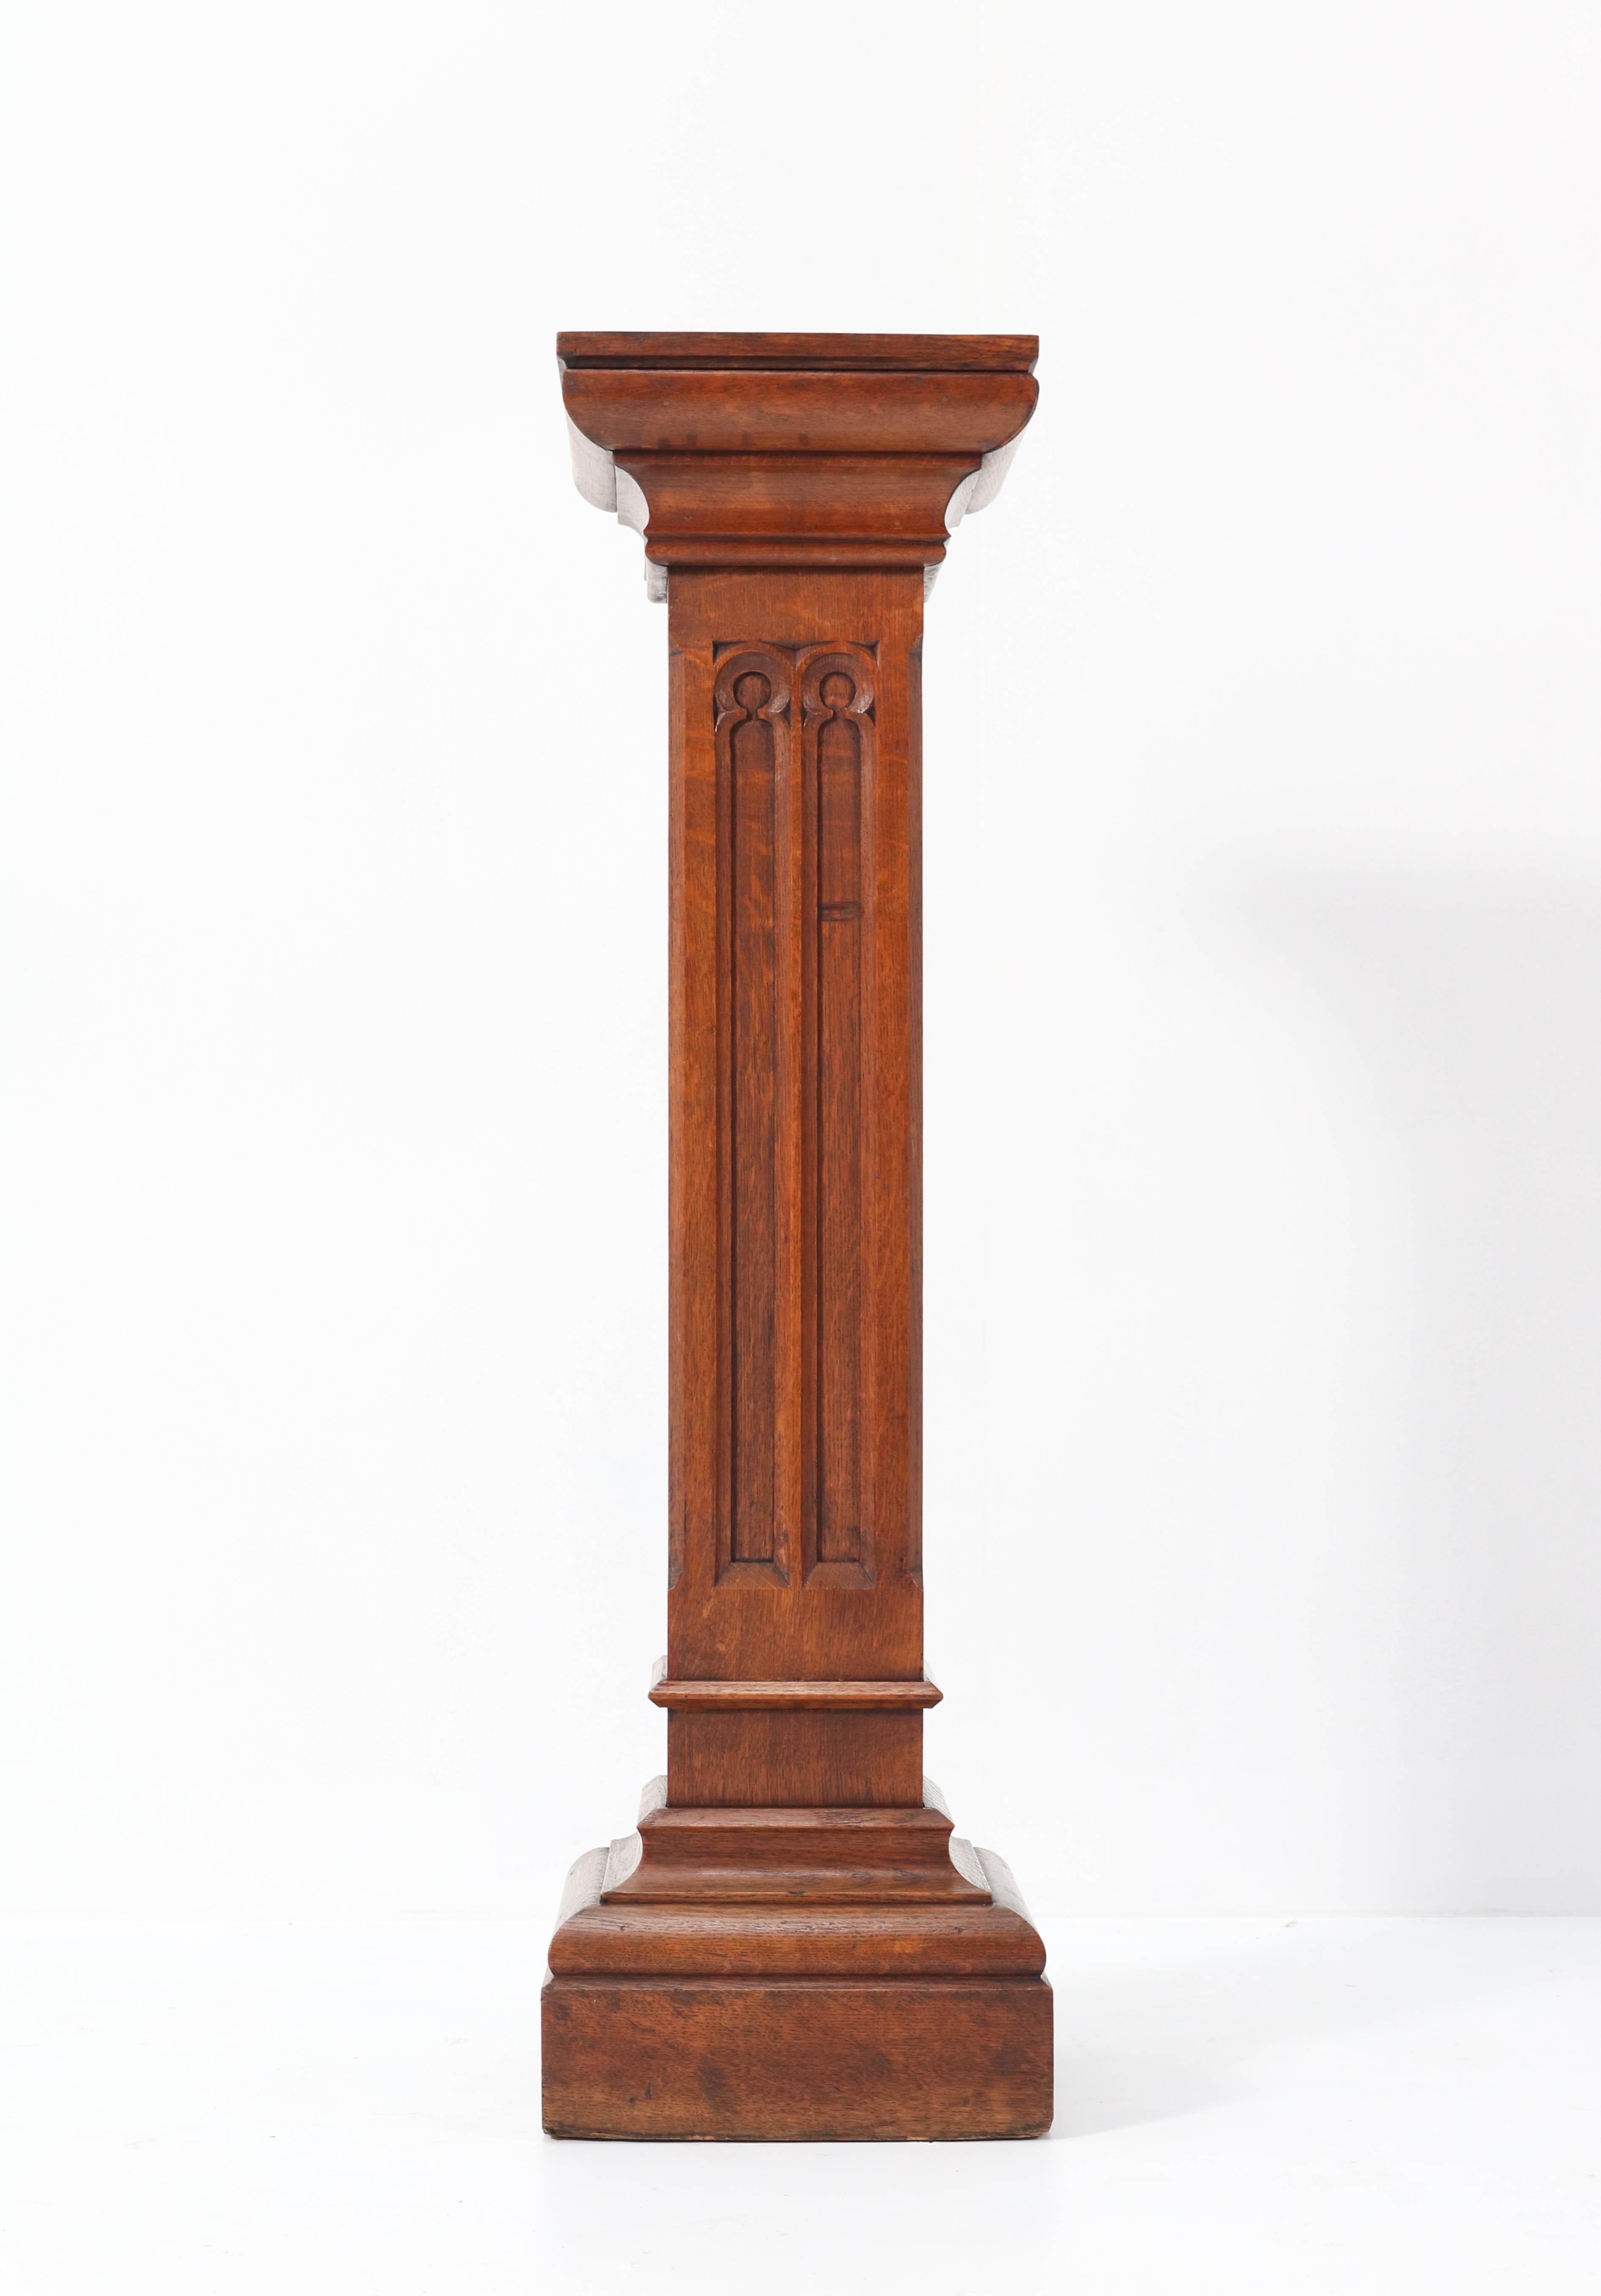 Wonderful Gothic Revival pedestal.
Striking Dutch design from the 1920s.
Solid oak with carved front.
In very good condition with minor wear consistent with age and use,
preserving a beautiful patina.